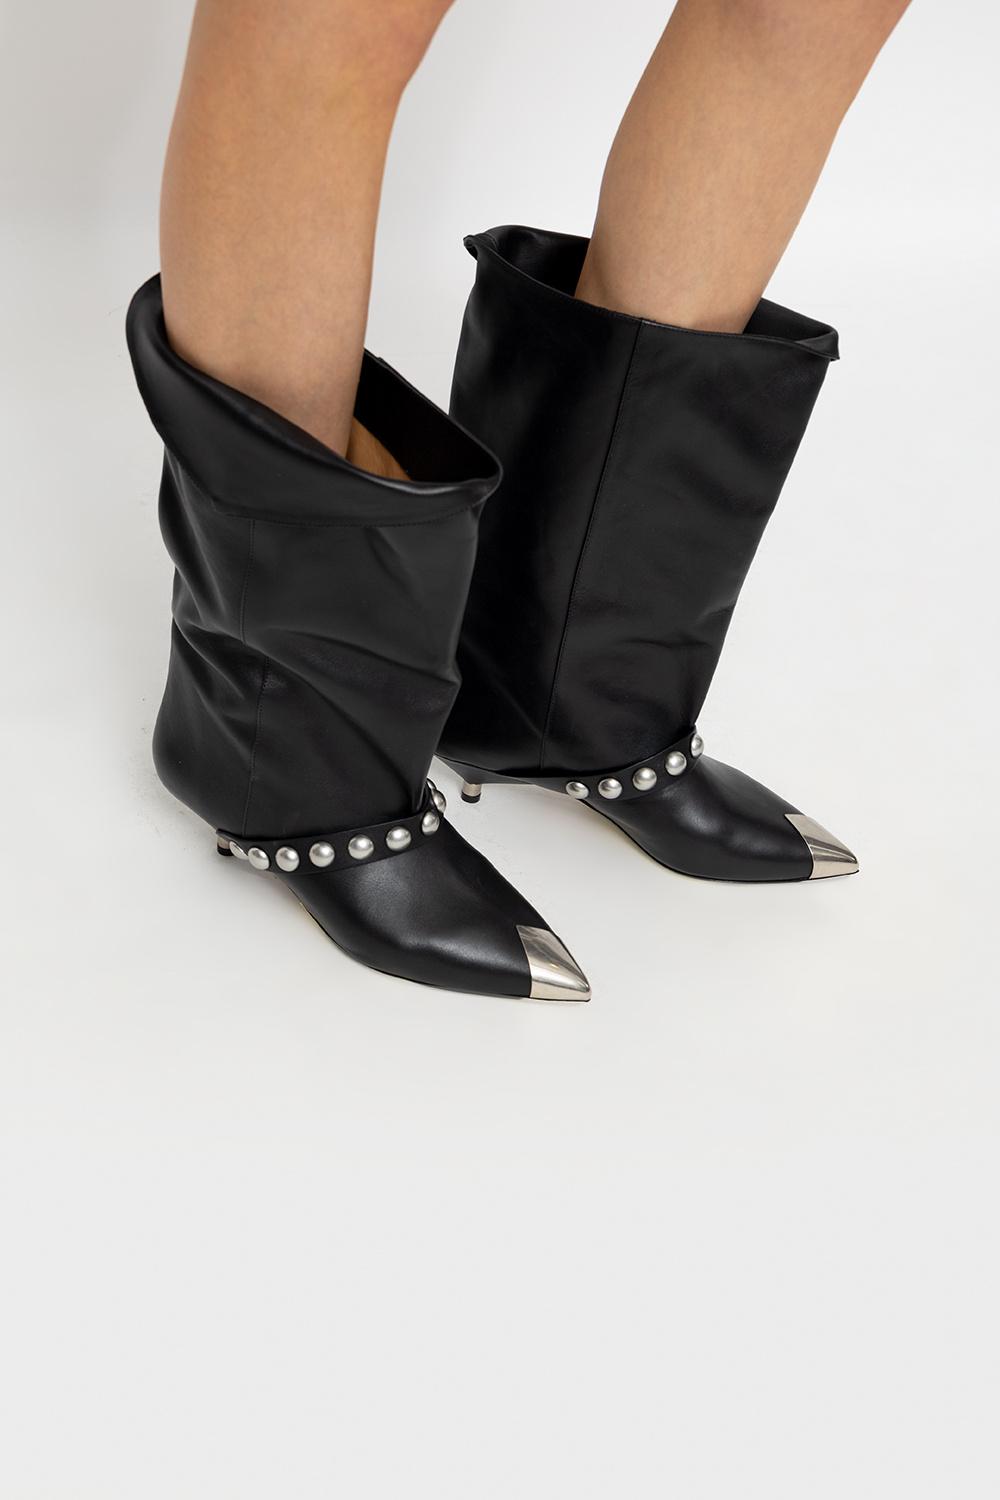 Isabel Marant Heeled Boots in |